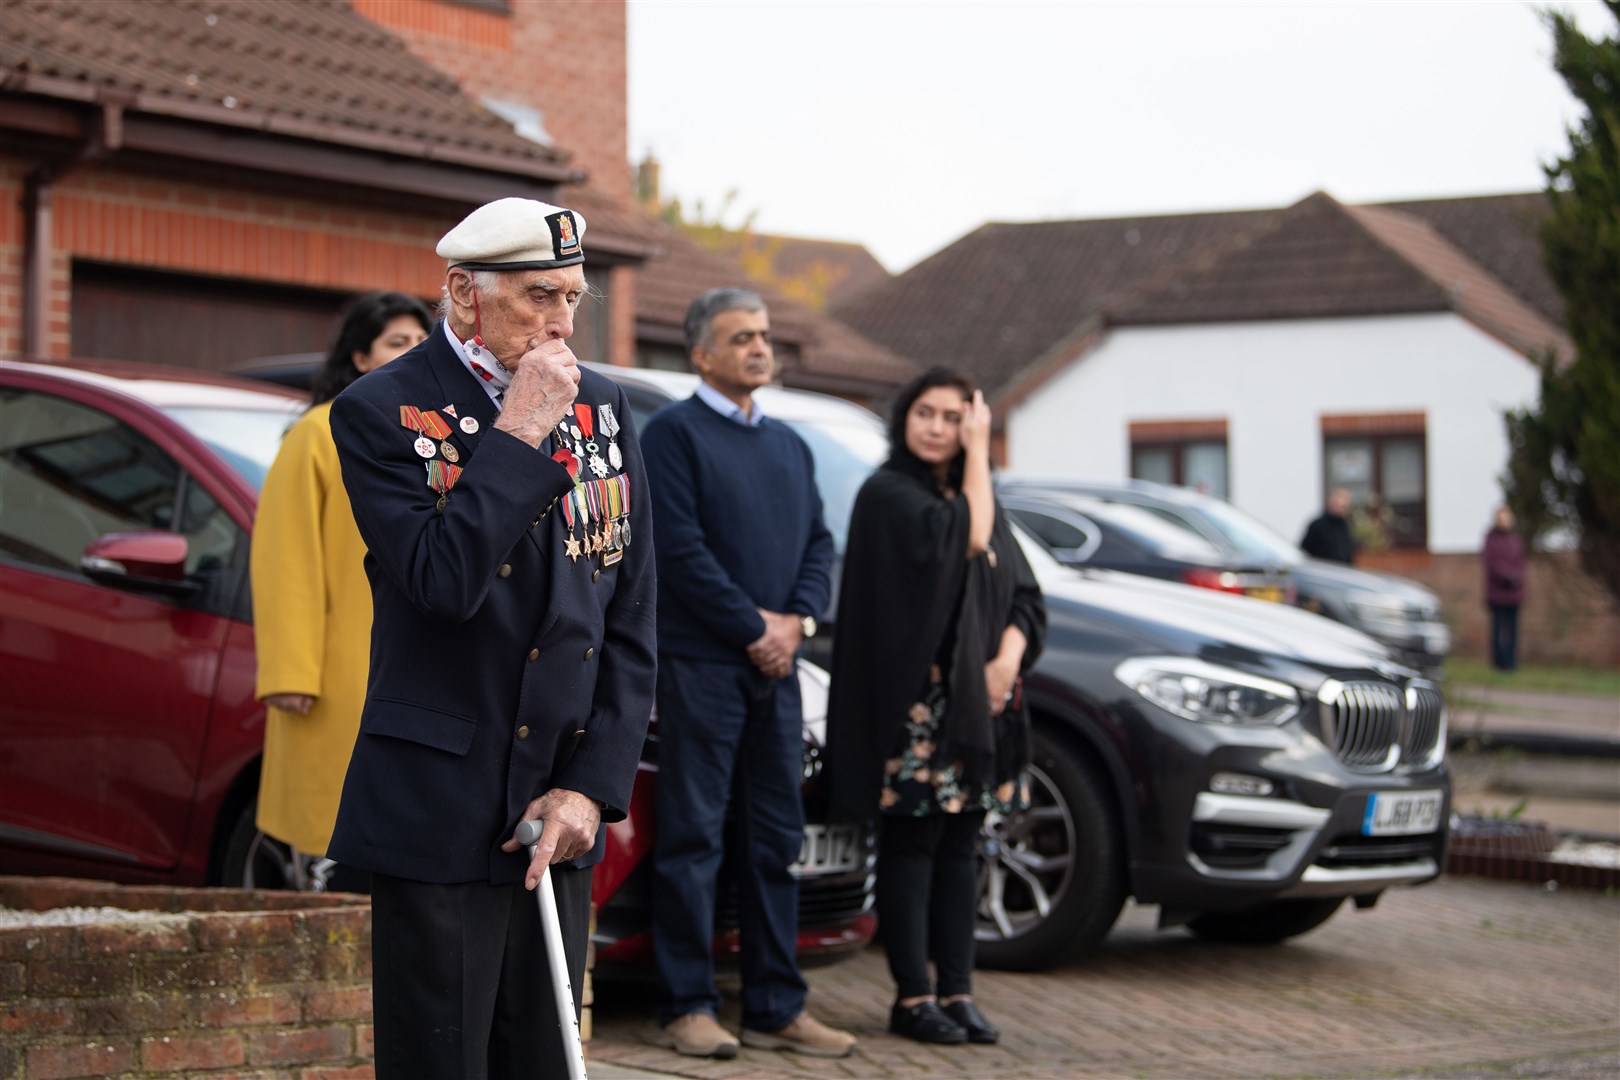 Seymour ‘Bill’ Taylor, 95, from Colchester in Essex, who served as an Able Seaman in the Royal Navy onboard HMS Emerald during the D-Day landings, joins neighbours in the street to pay respects (Joe Giddens/PA)